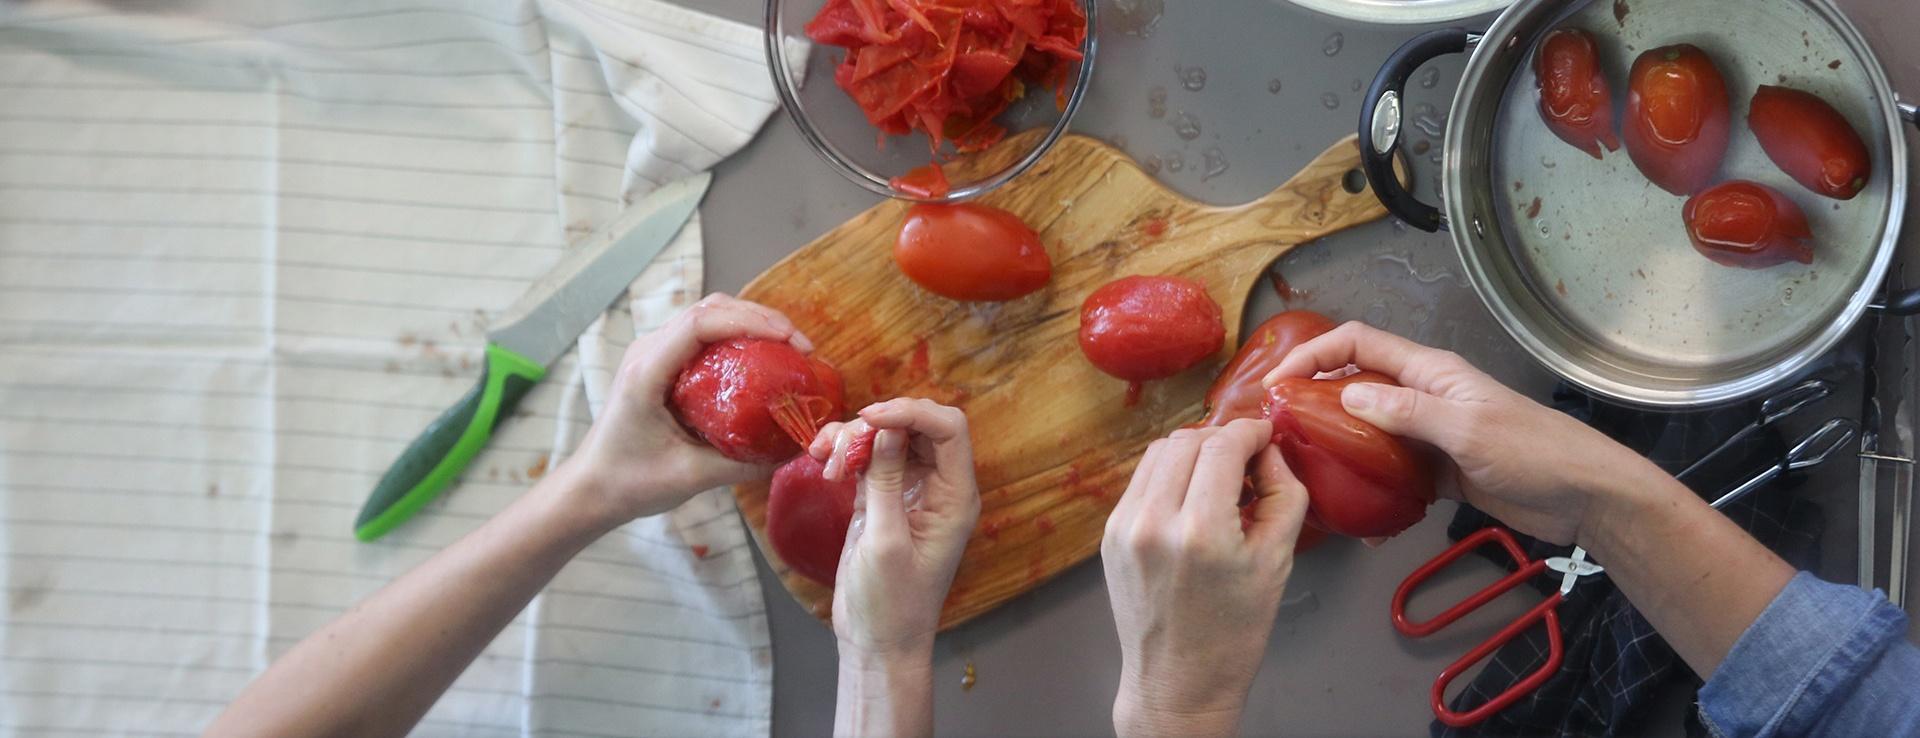 Preparing Salvaterra Select and Red Pear Abruzzese tomatoes for canning by removing the skins.